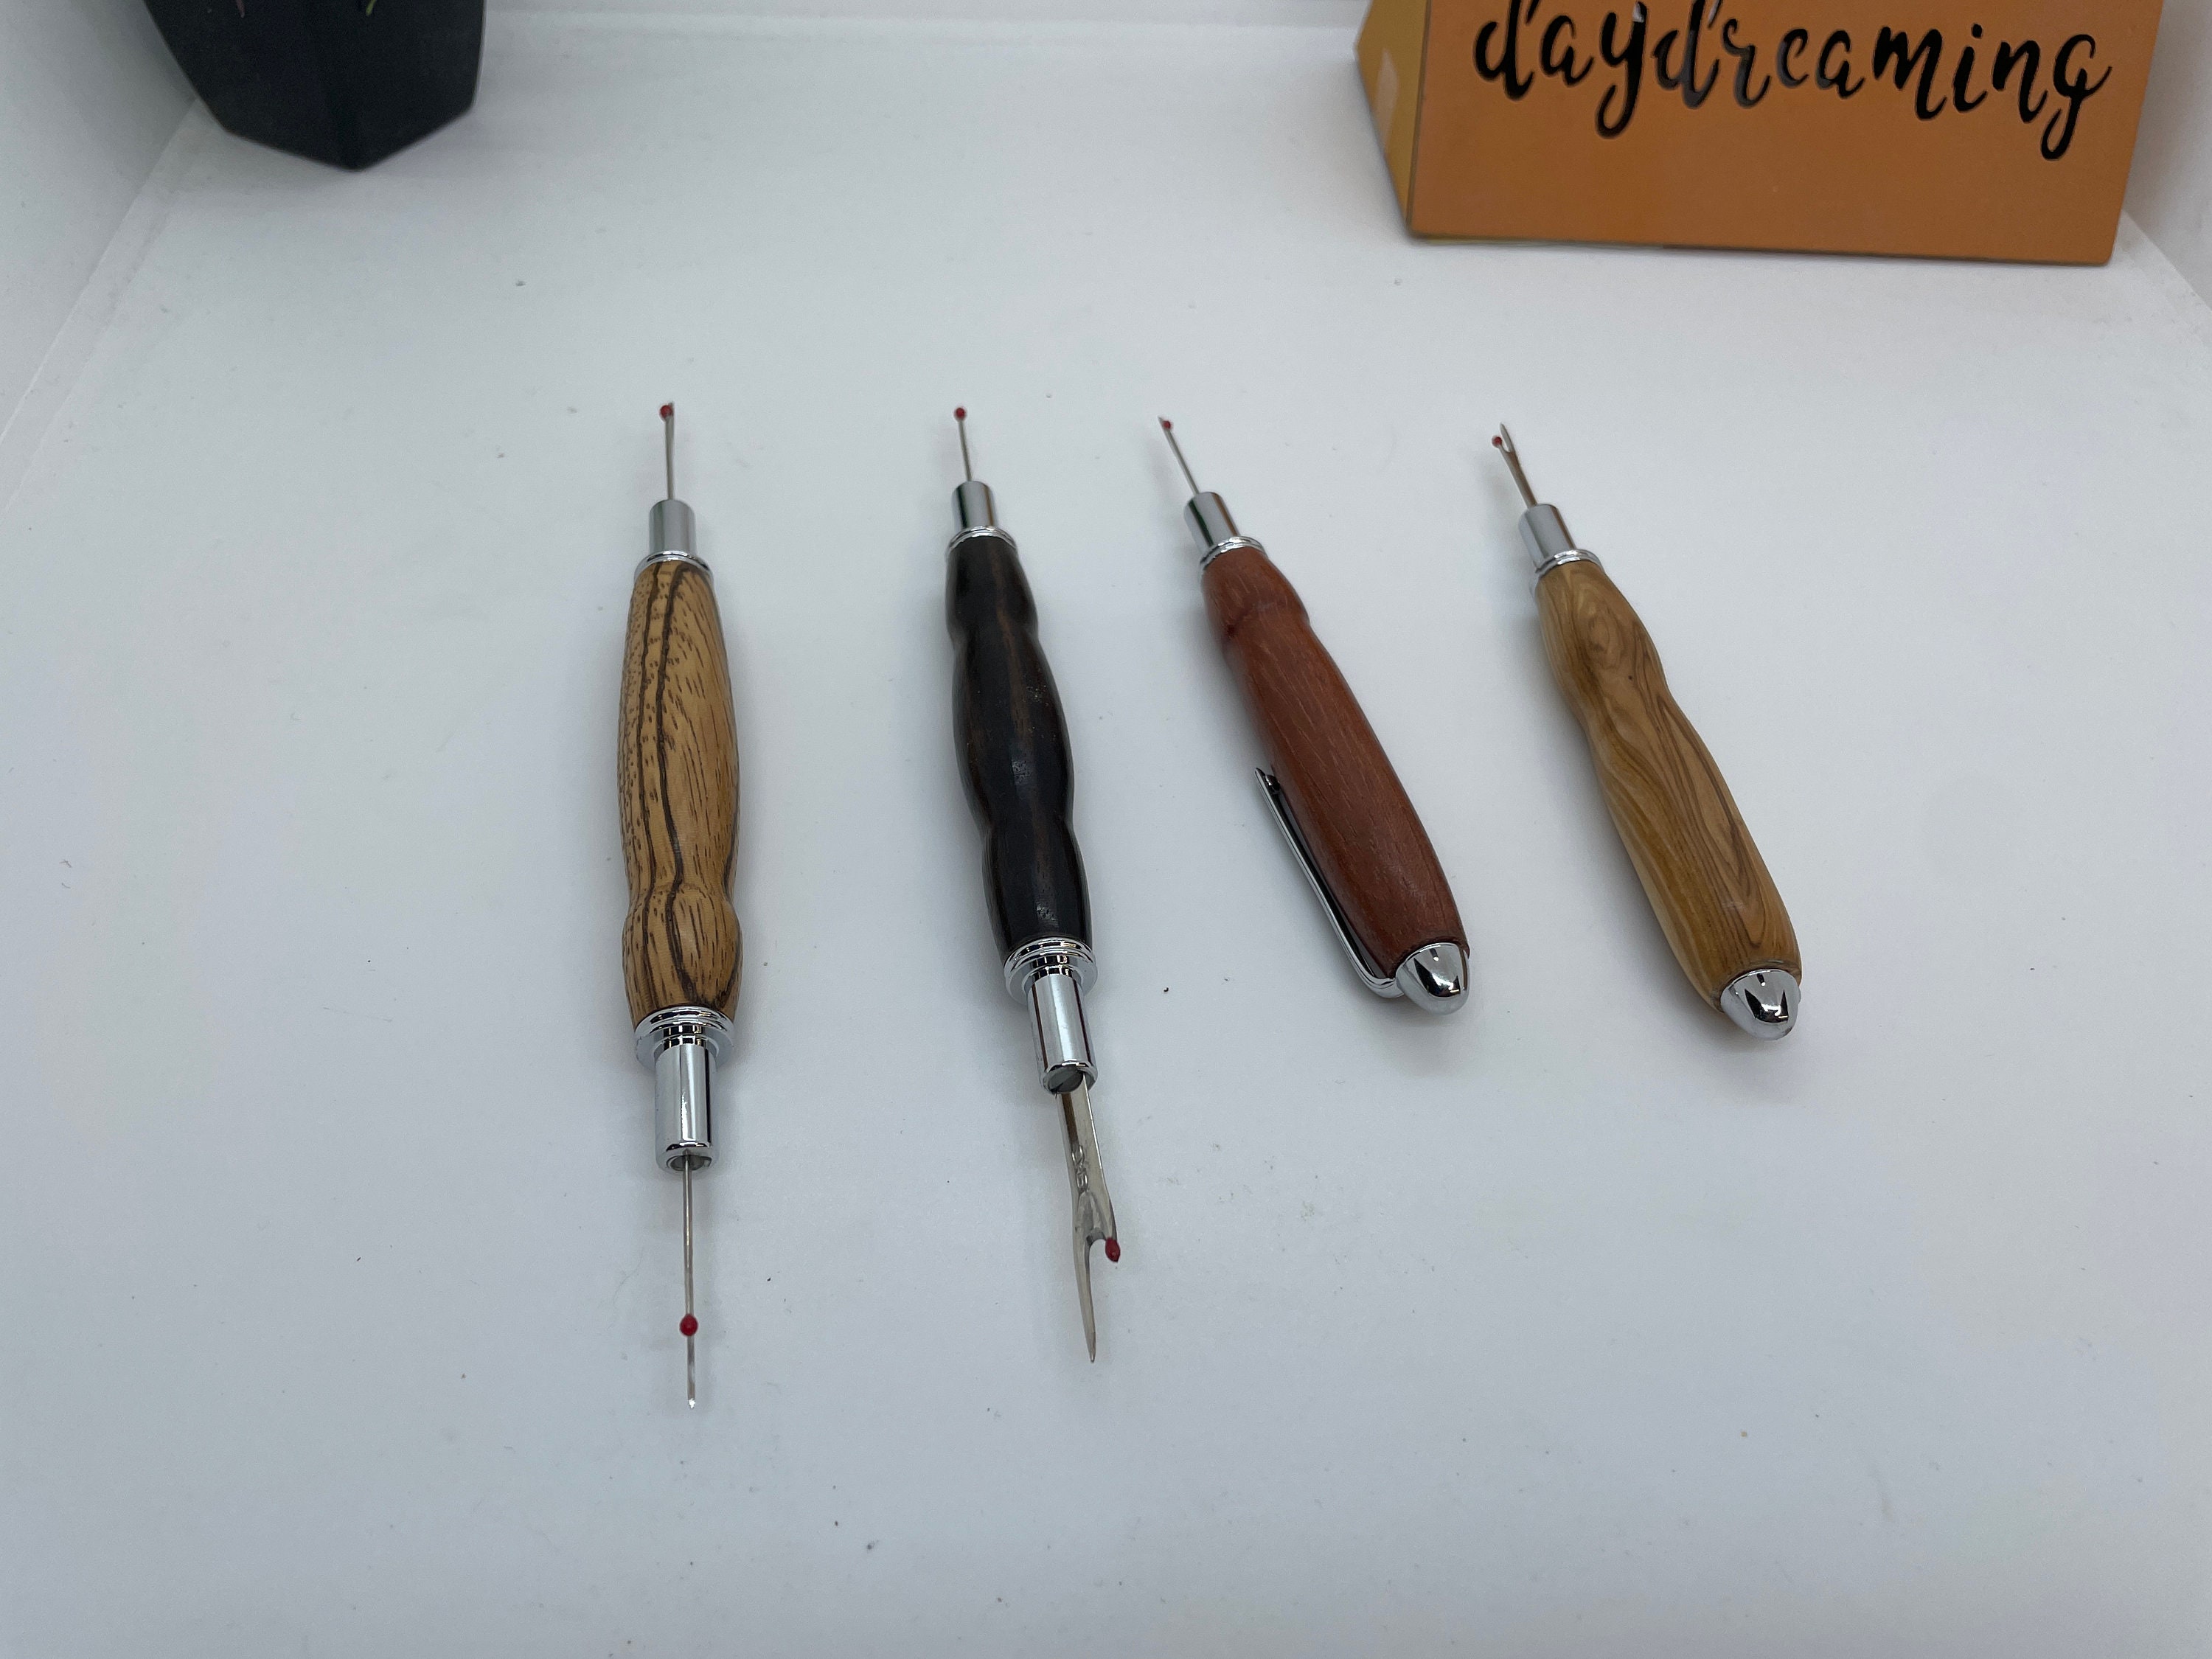 Personalized Vintage Name Seam Ripper, Alloy Stitch Remover Tool